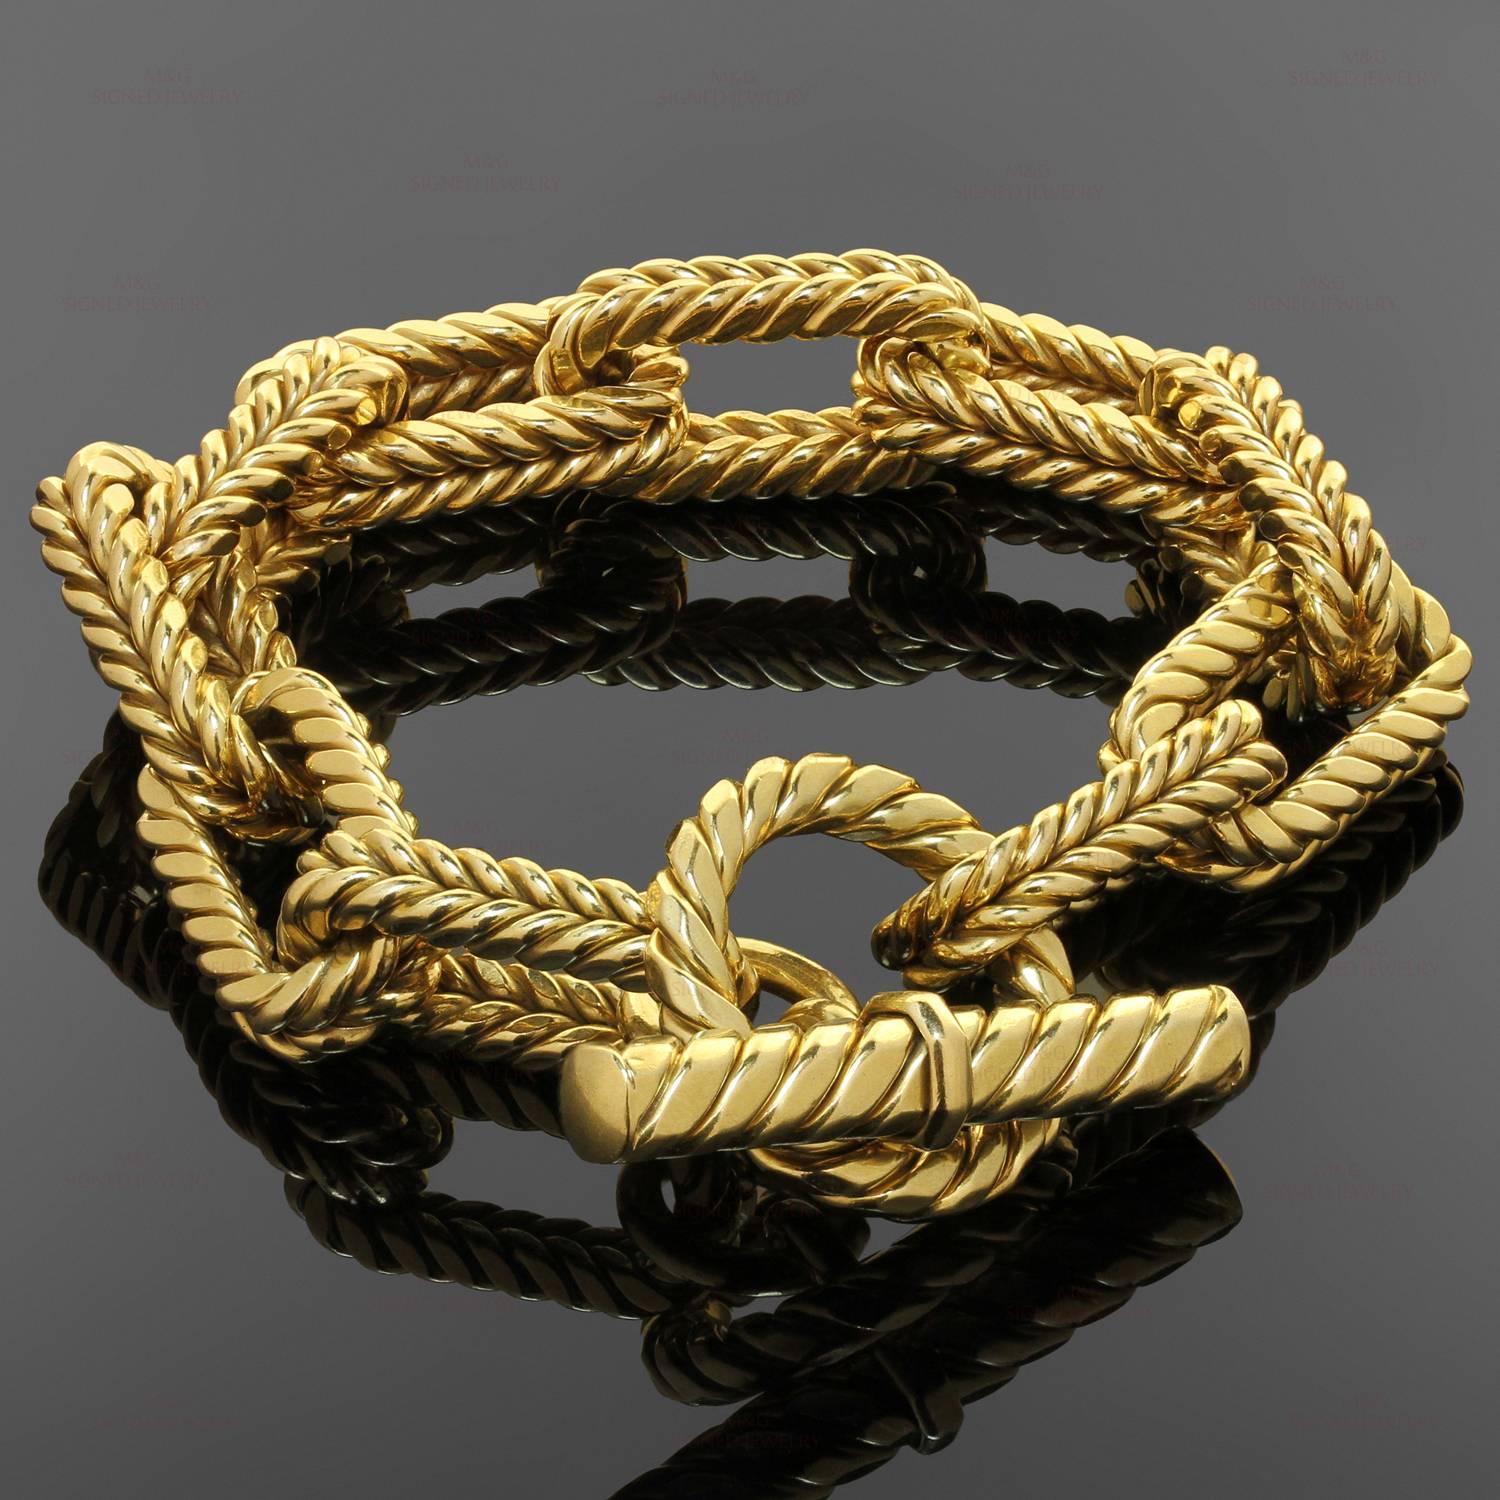 This classic toggle clasp bracelet features ridged rectangular links crafted in 18k yellow gold. Made in Italy circa 1980s. Measurements: 0.51